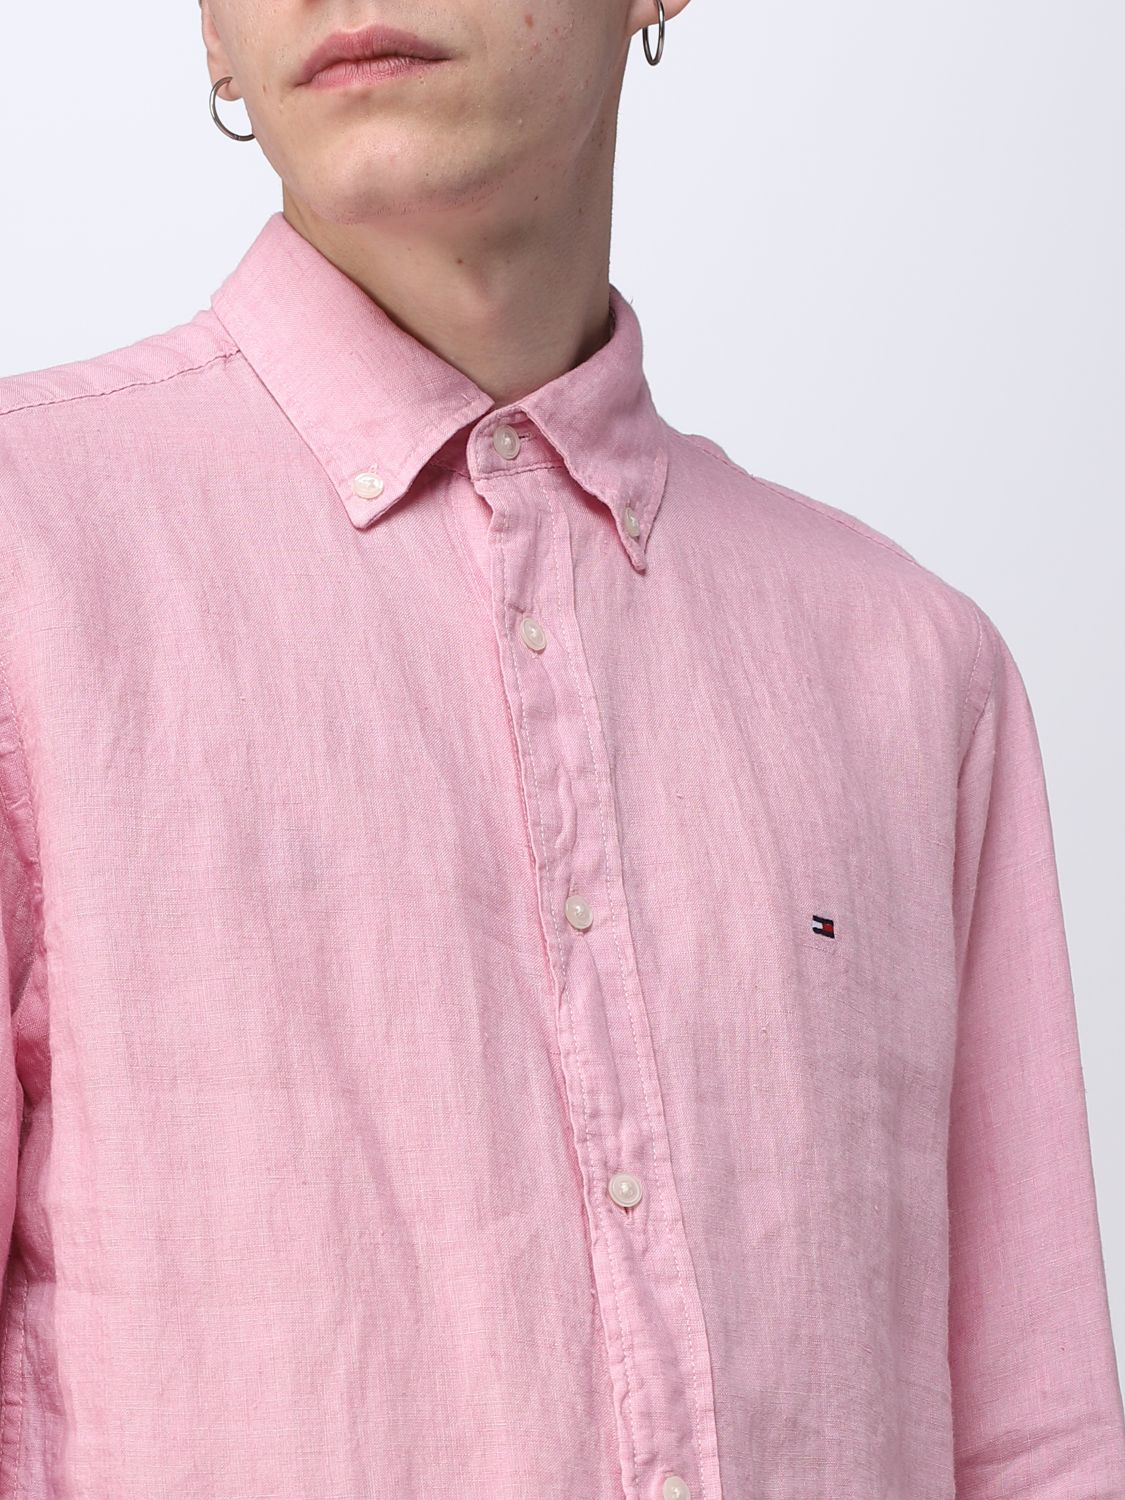 TOMMY shirt for man - Pink | Tommy Hilfiger shirt MW0MW30897 online at